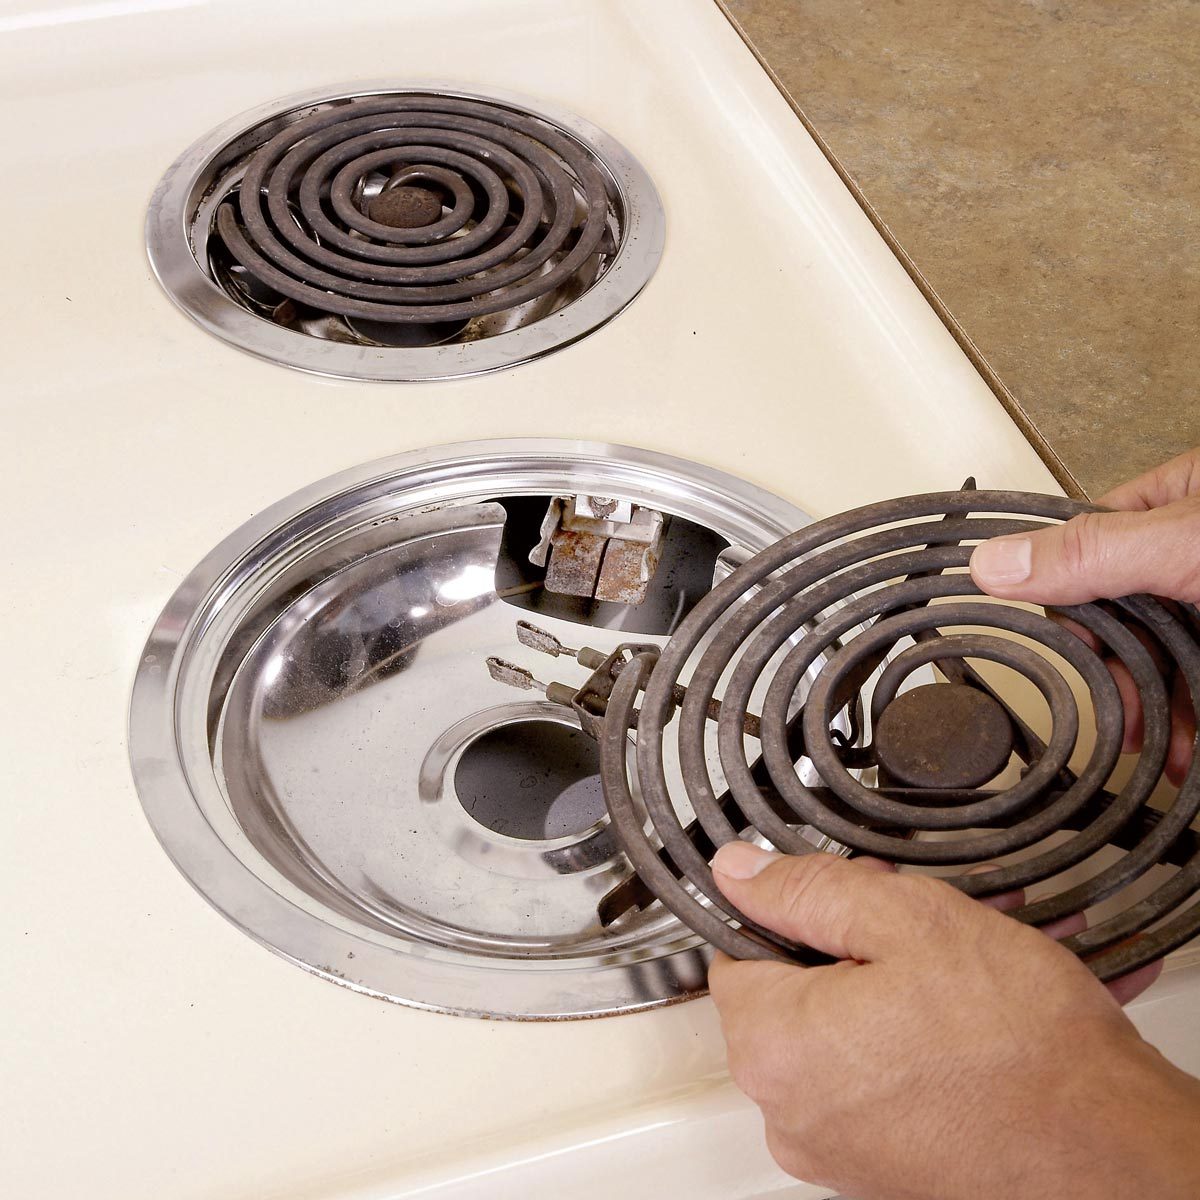 Here's How To Properly Clean your Electric Stove